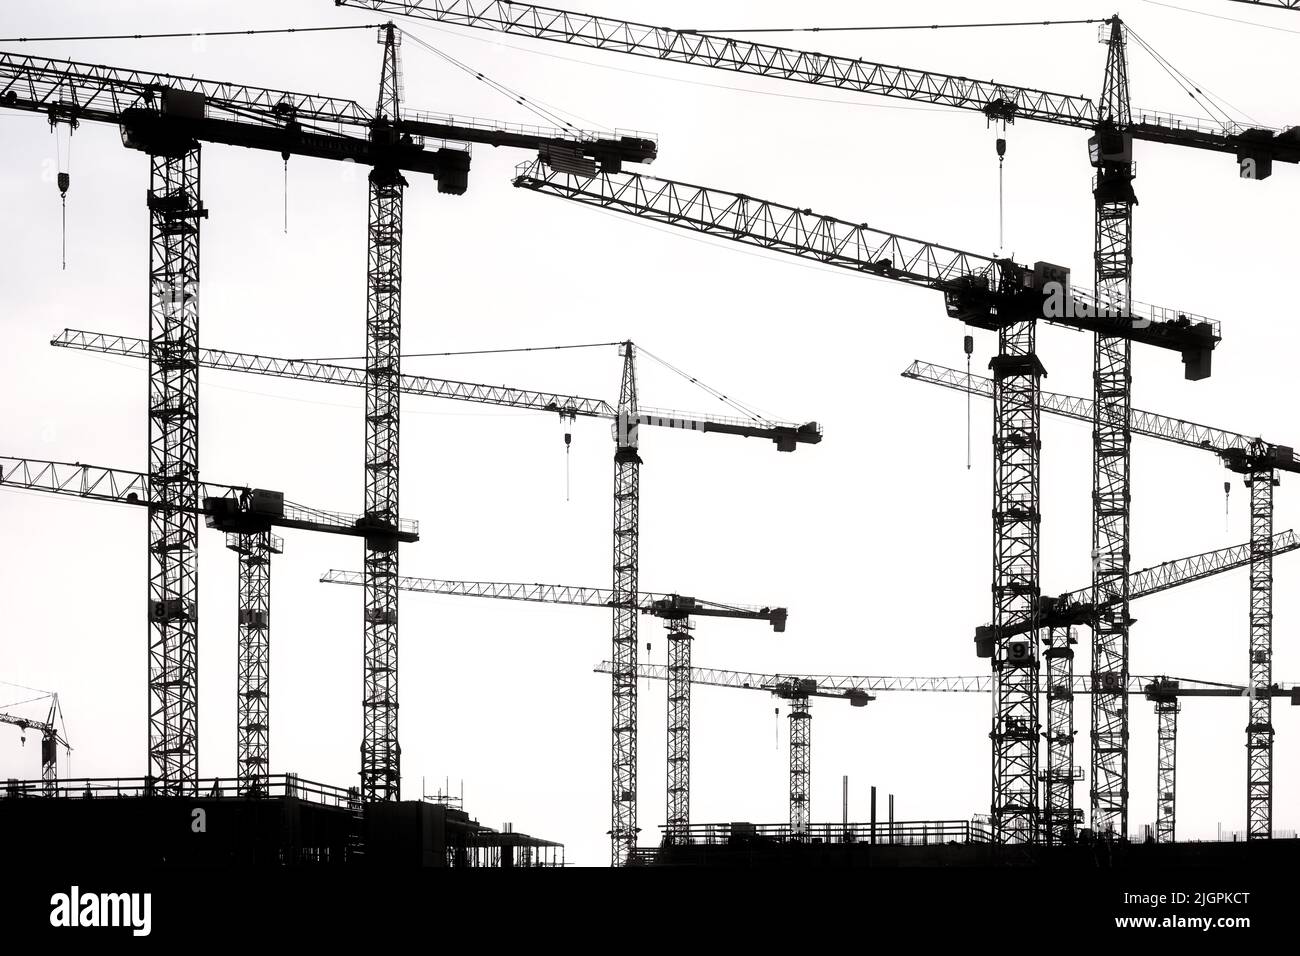 Construction Cranes In The Harbour City Of Hamburg, Germany Stock Photo